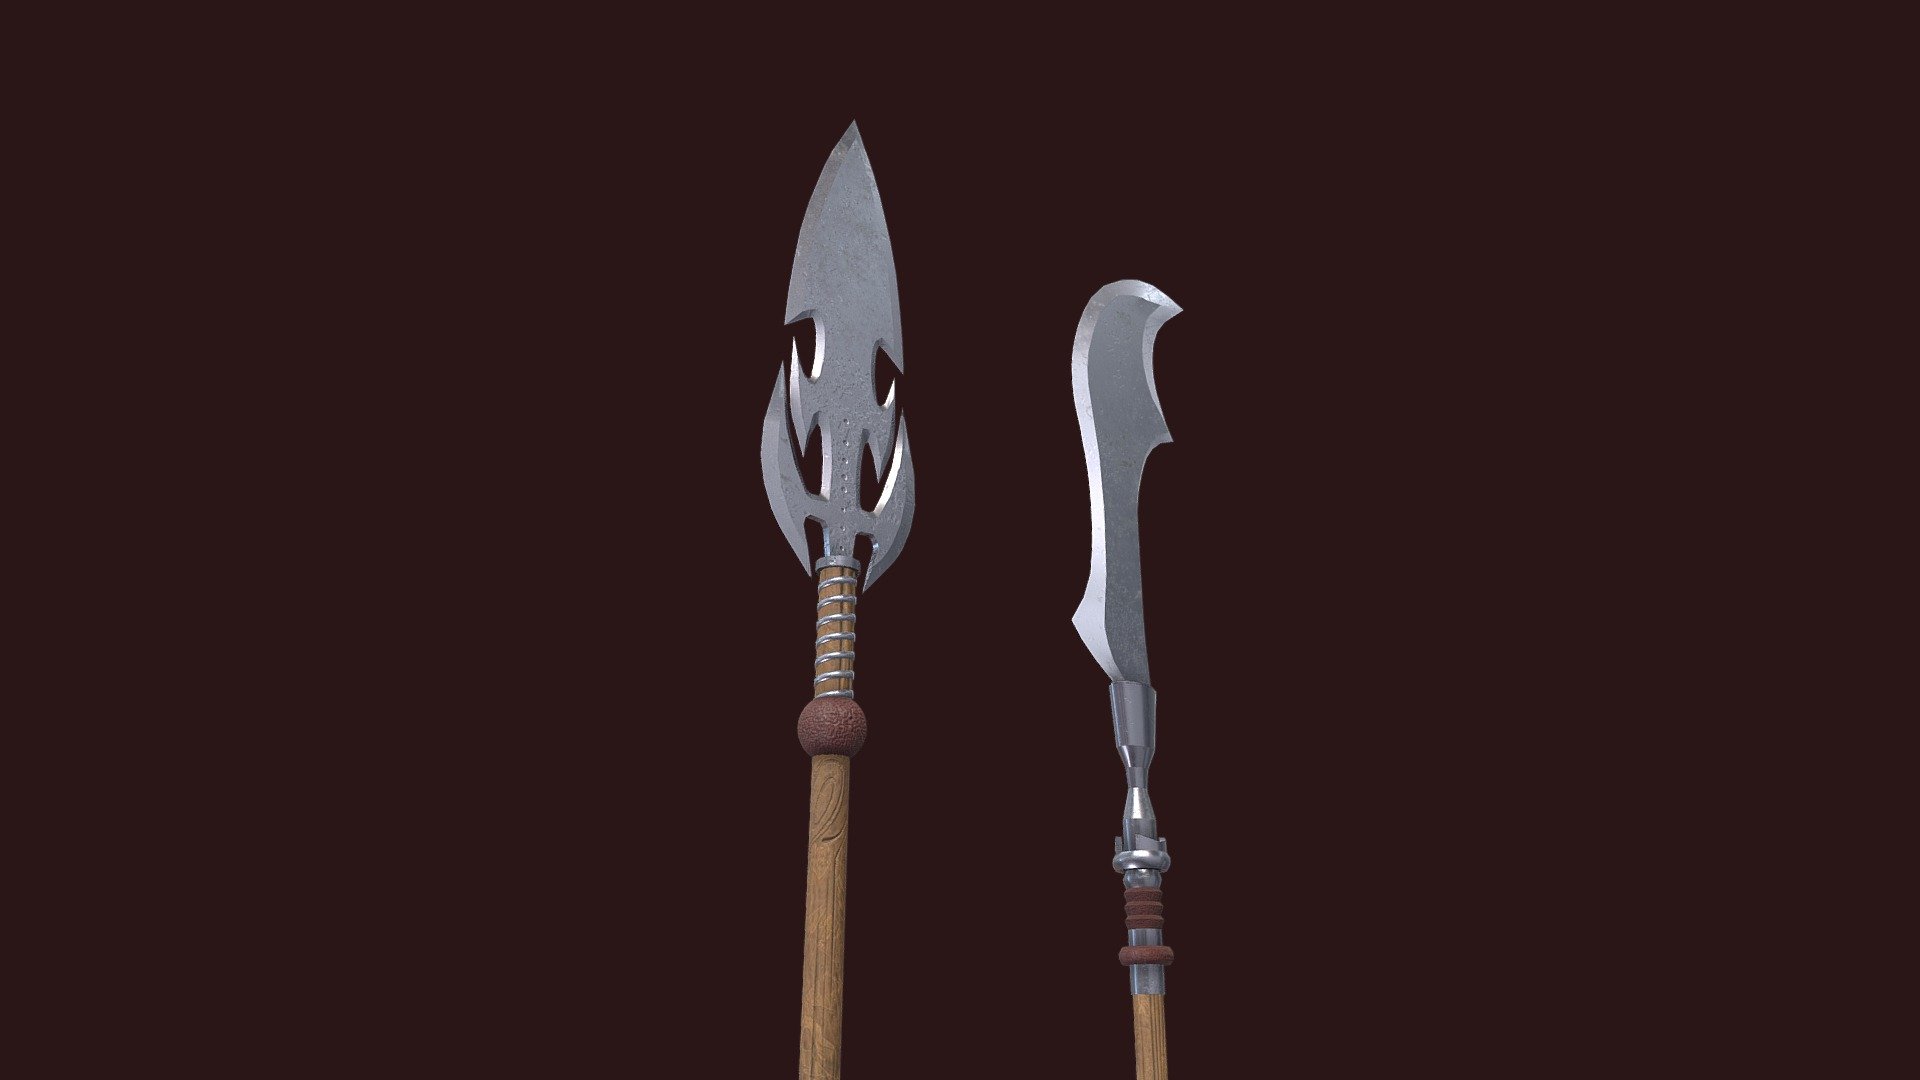 It is a spear and a glaive model that I made with a reference model for my medieval asset 3d model